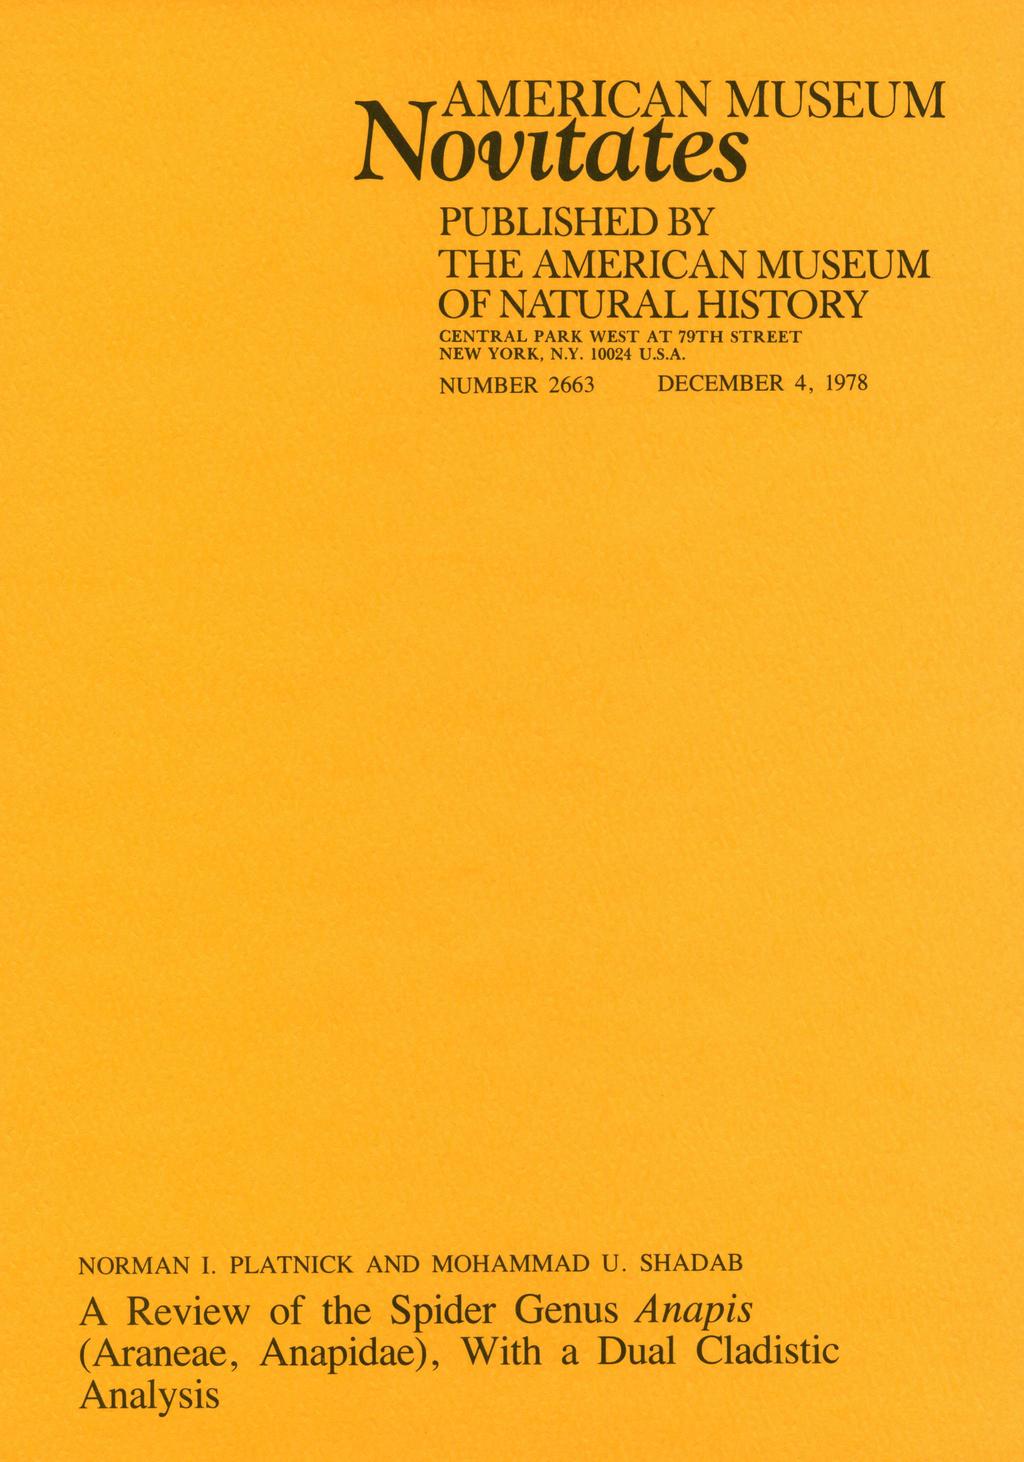 NAMERICAN MUSEUM Novttates PUBLISHED BY THE AMERICAN MUSEUM OF NATURAL HISTORY CENTRAL PARK WEST AT 79TH STREET NEW YORK, N.Y. 10024 U.S.A. NUMBER 2663 DECEMBER 4, 1978 NORMAN I.